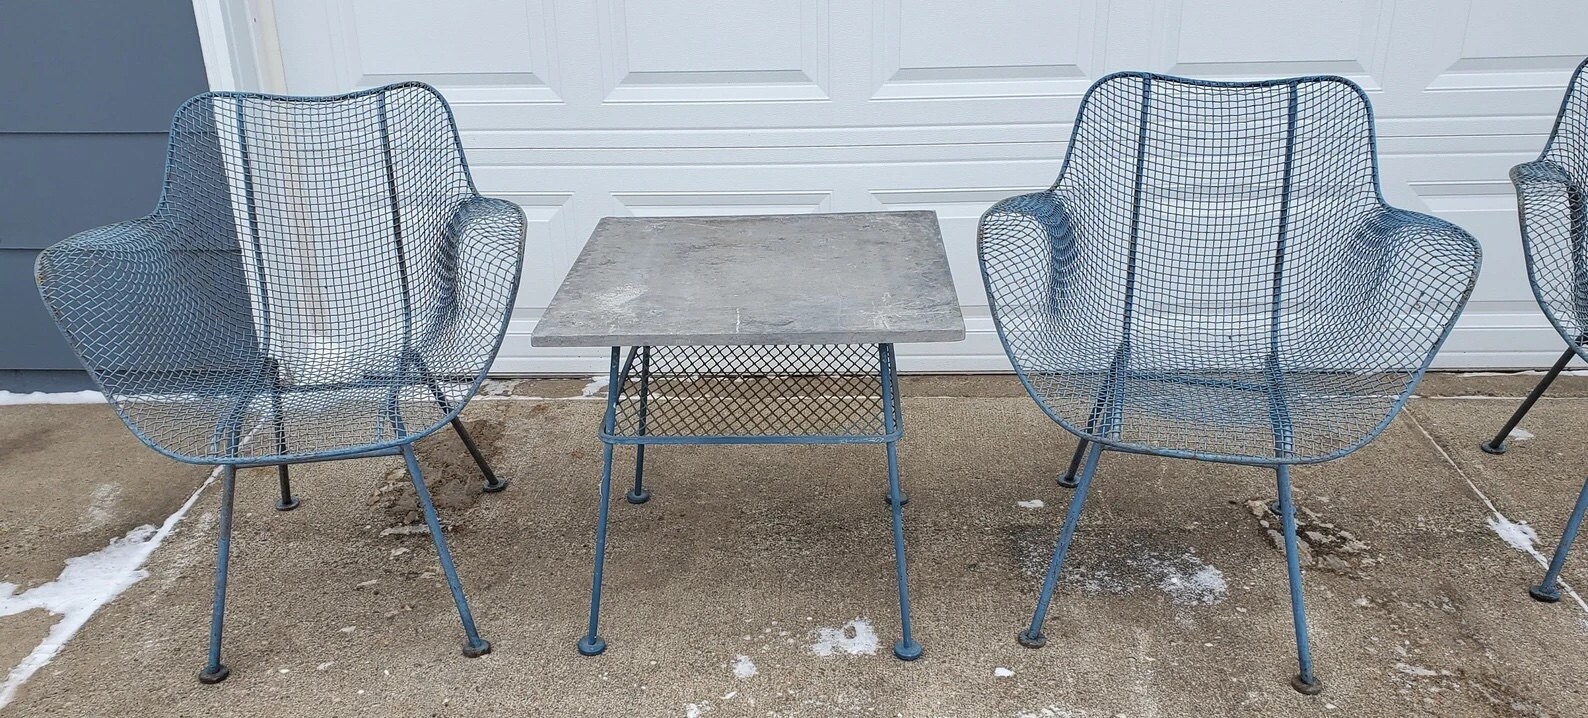 Vintage metal chairs from Etsy